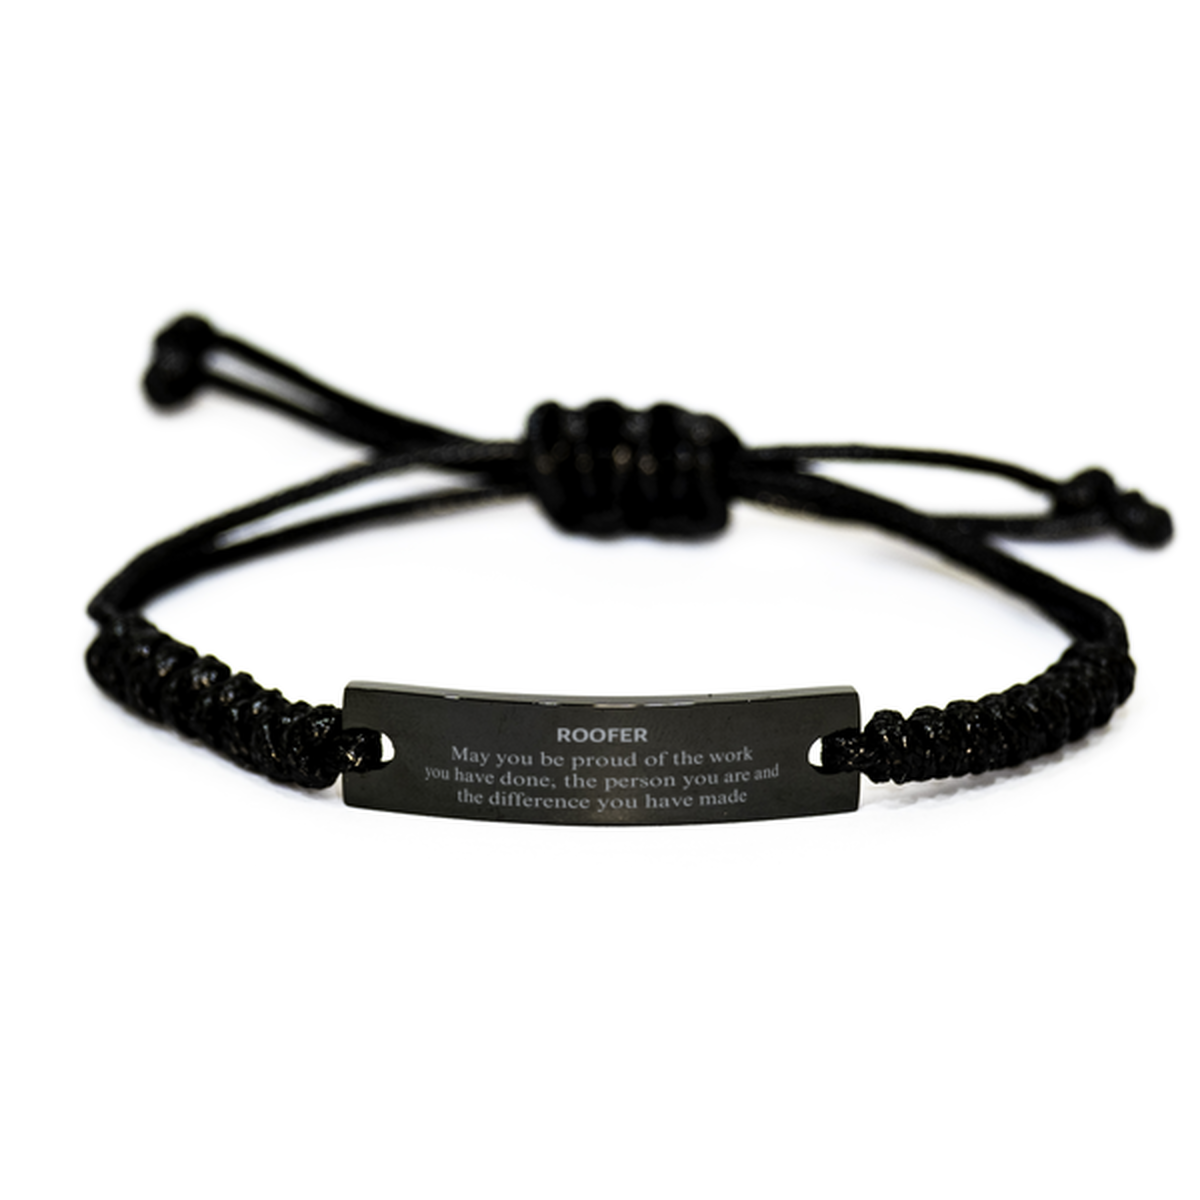 Roofer May you be proud of the work you have done, Retirement Roofer Black Rope Bracelet for Colleague Appreciation Gifts Amazing for Roofer